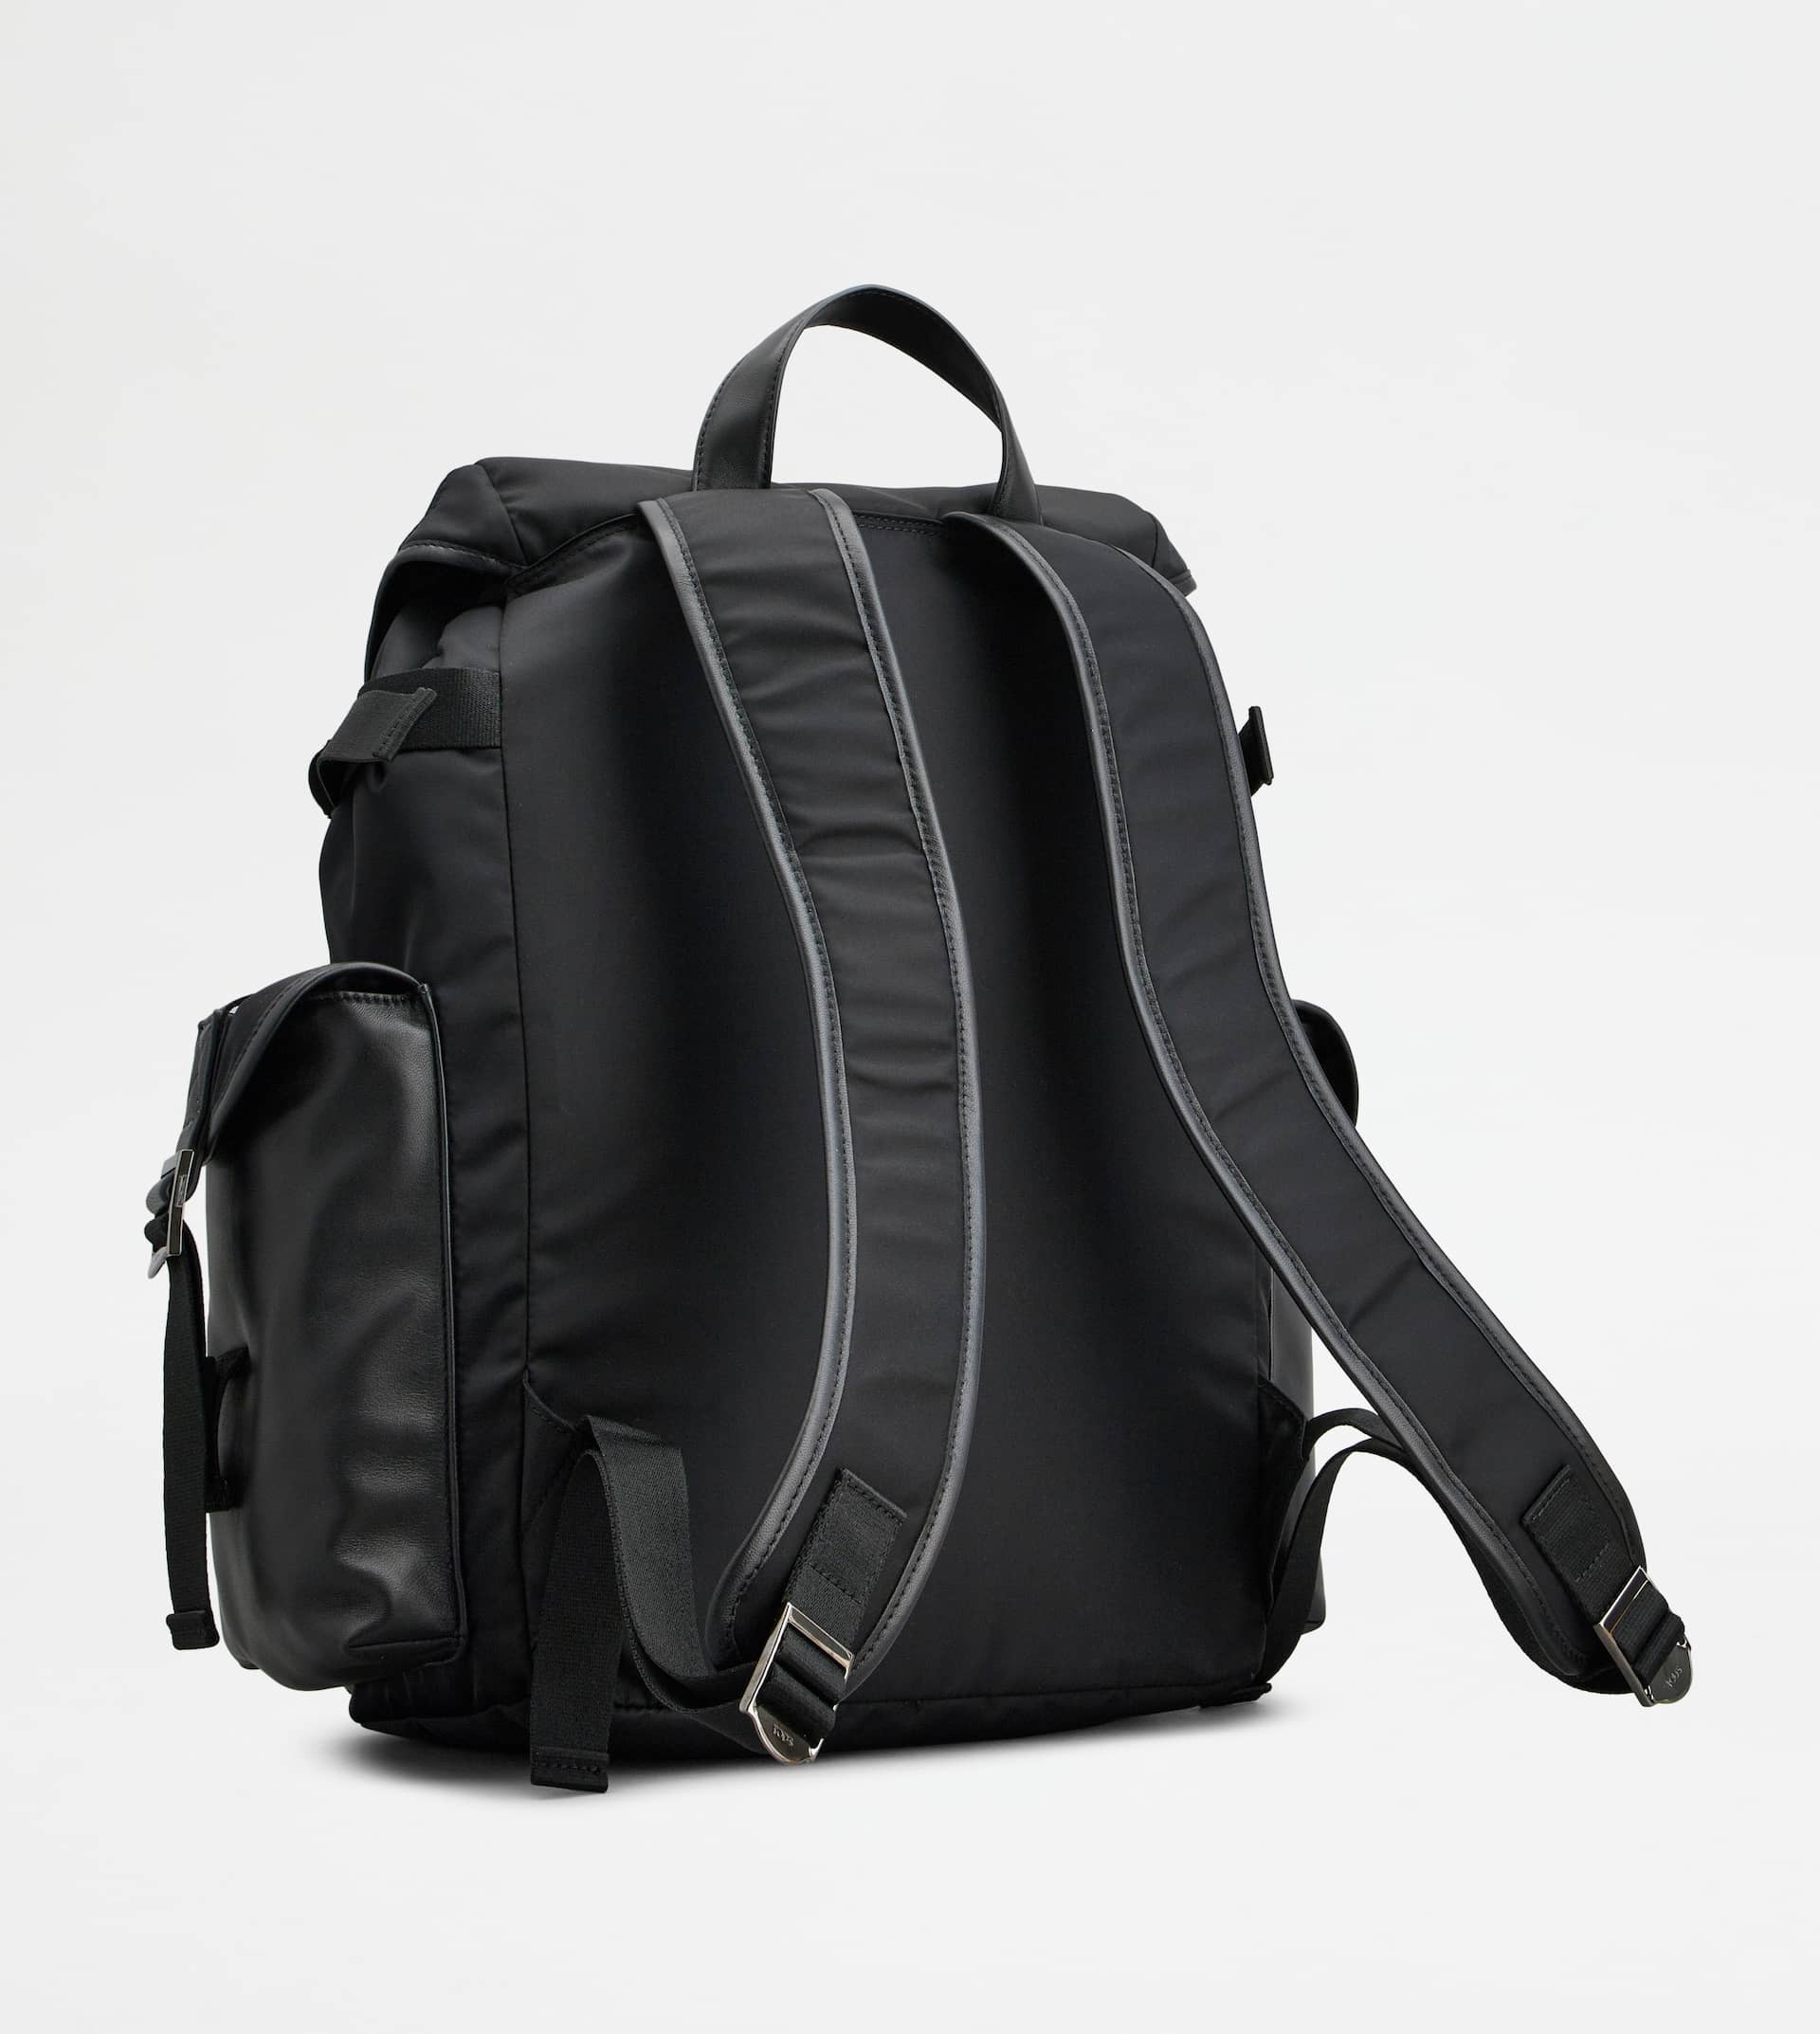 BACKPACK IN FABRIC AND LEATHER MEDIUM - BLACK - 5